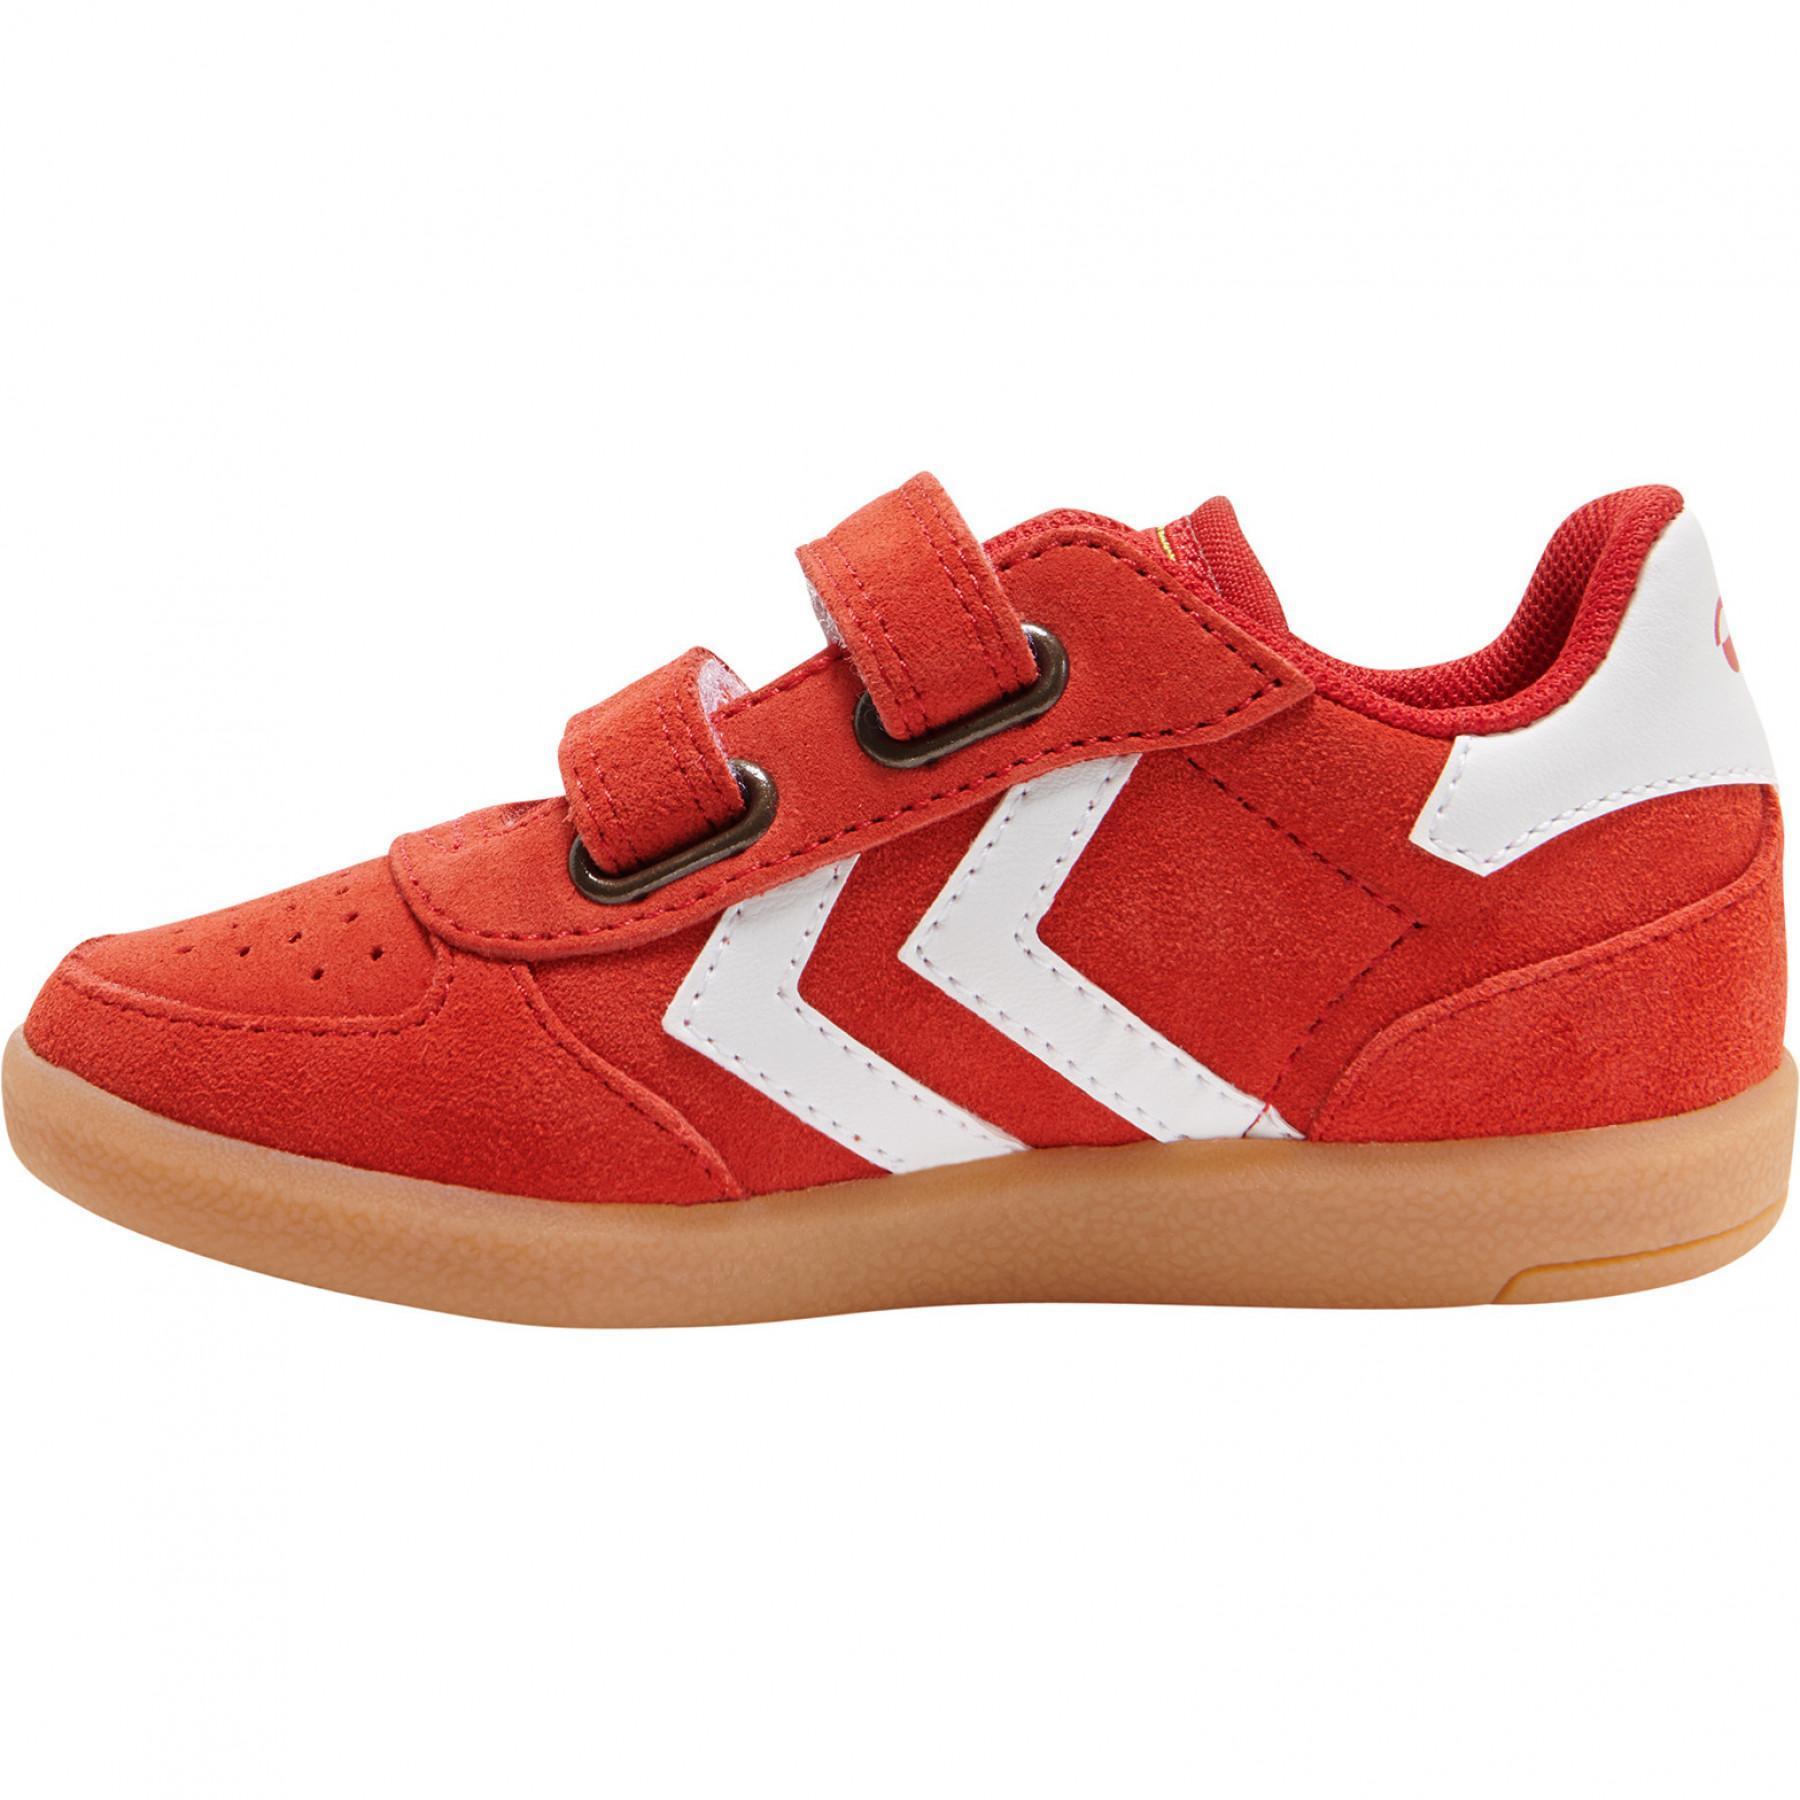 Trainers Hummel victory suede infant